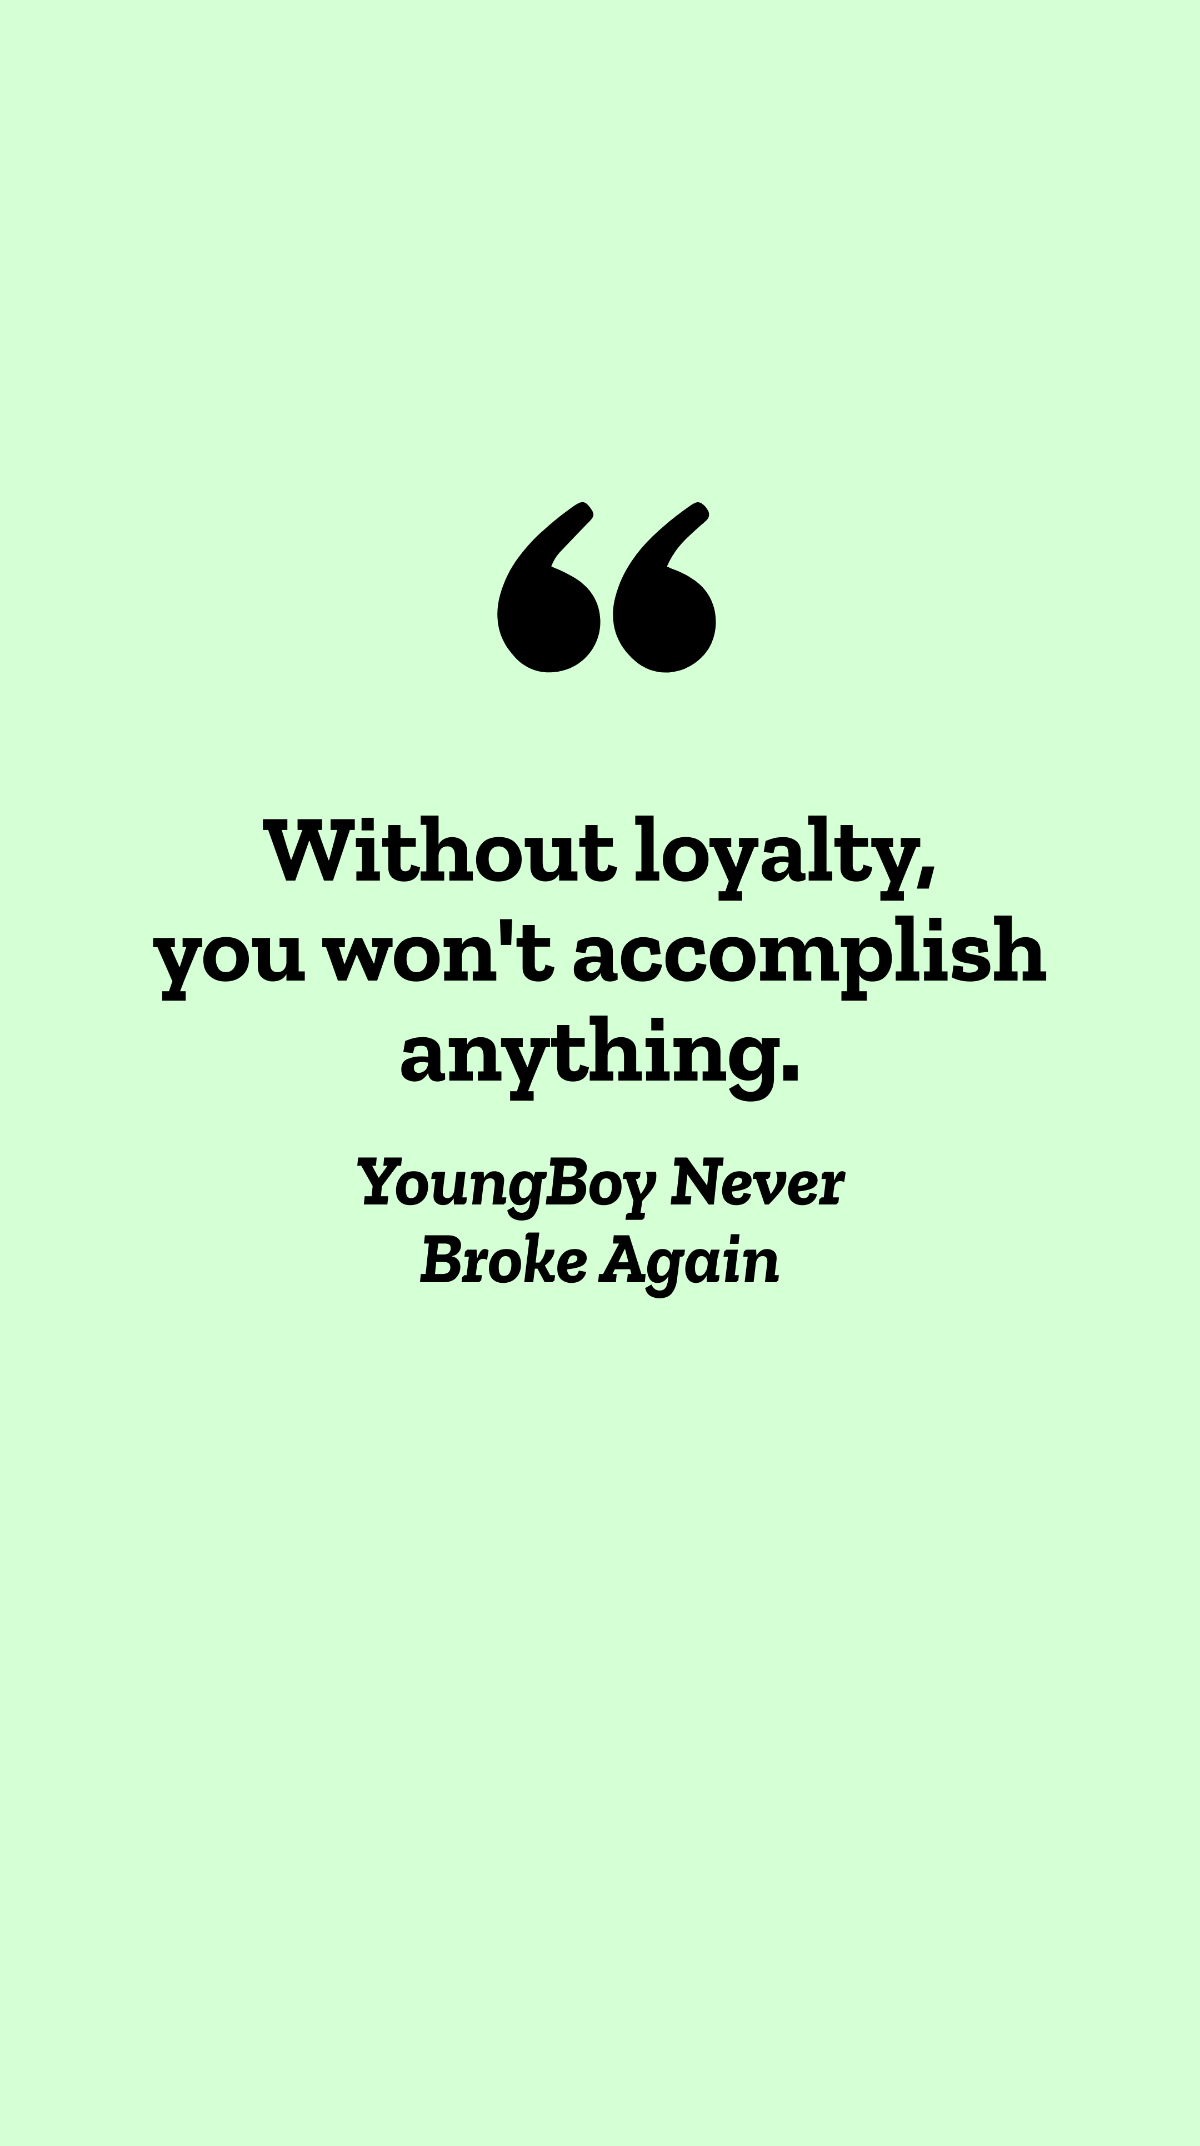 YoungBoy Never Broke Again - Without loyalty, you won't accomplish ...